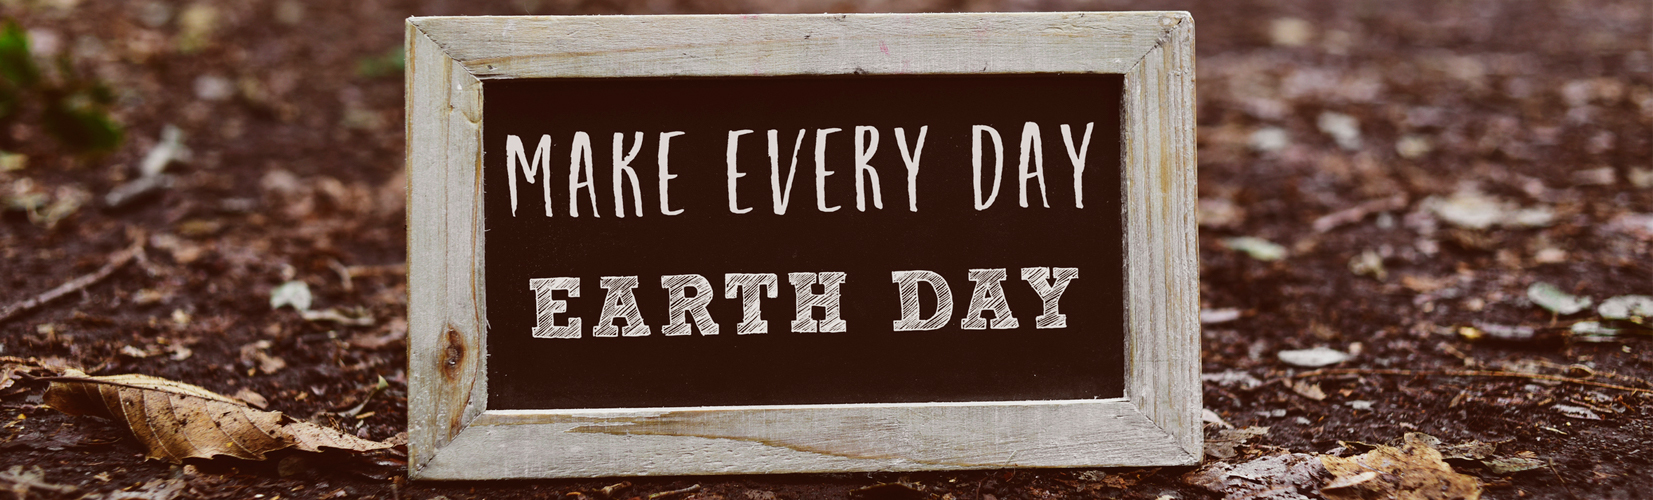 Make every day earth day written inside wooden frame